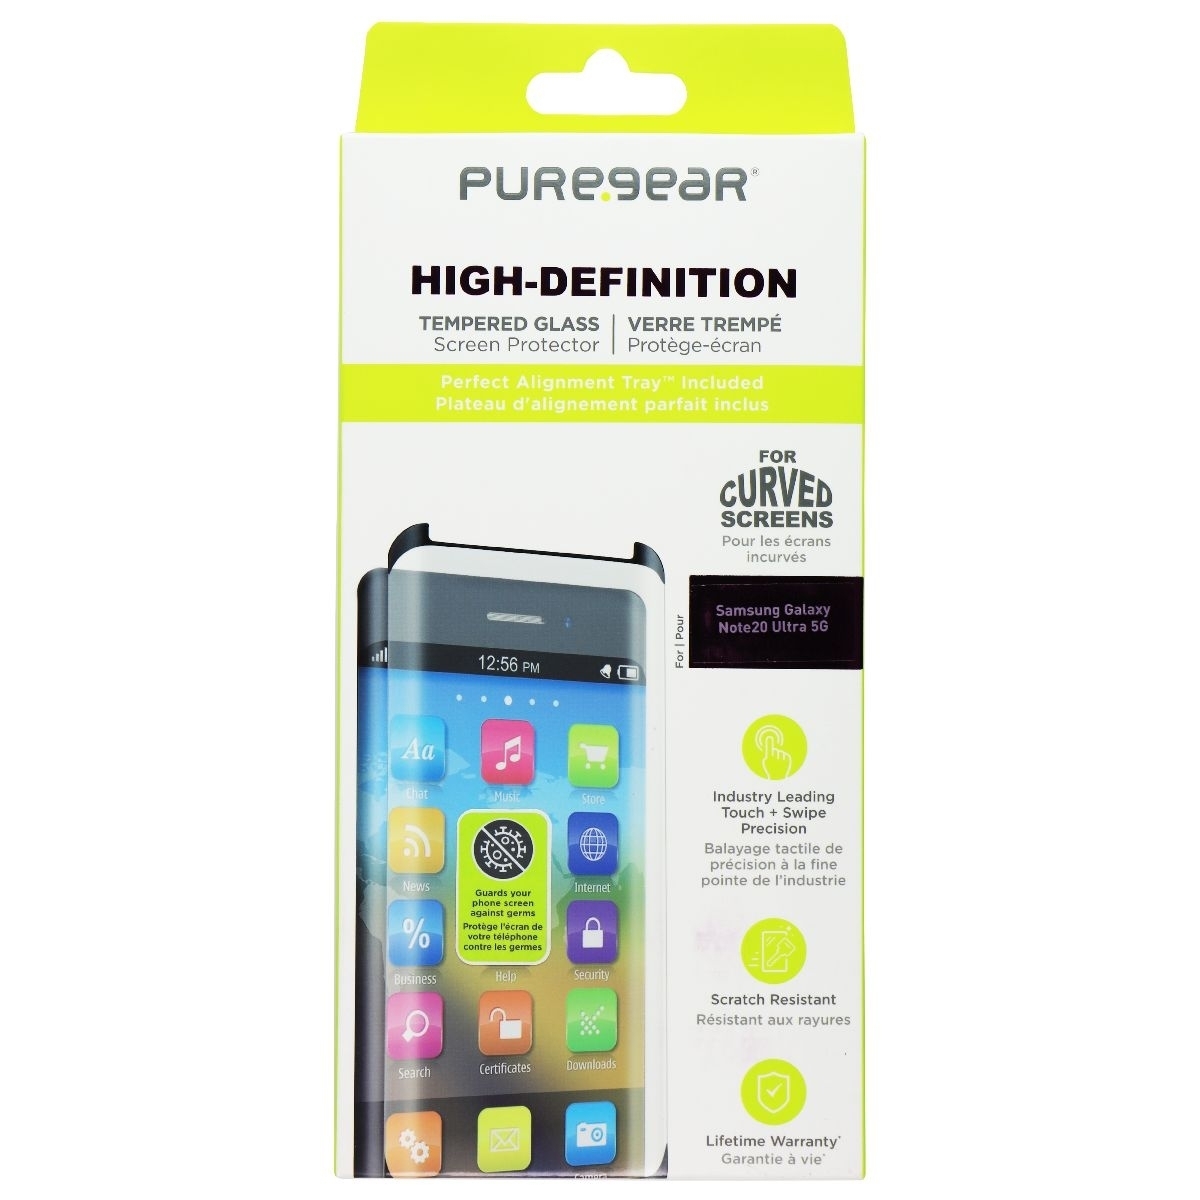 PureGear High-Definition Tempered Glass For Samsung Galaxy Note20 Ultra 5G (Refurbished)